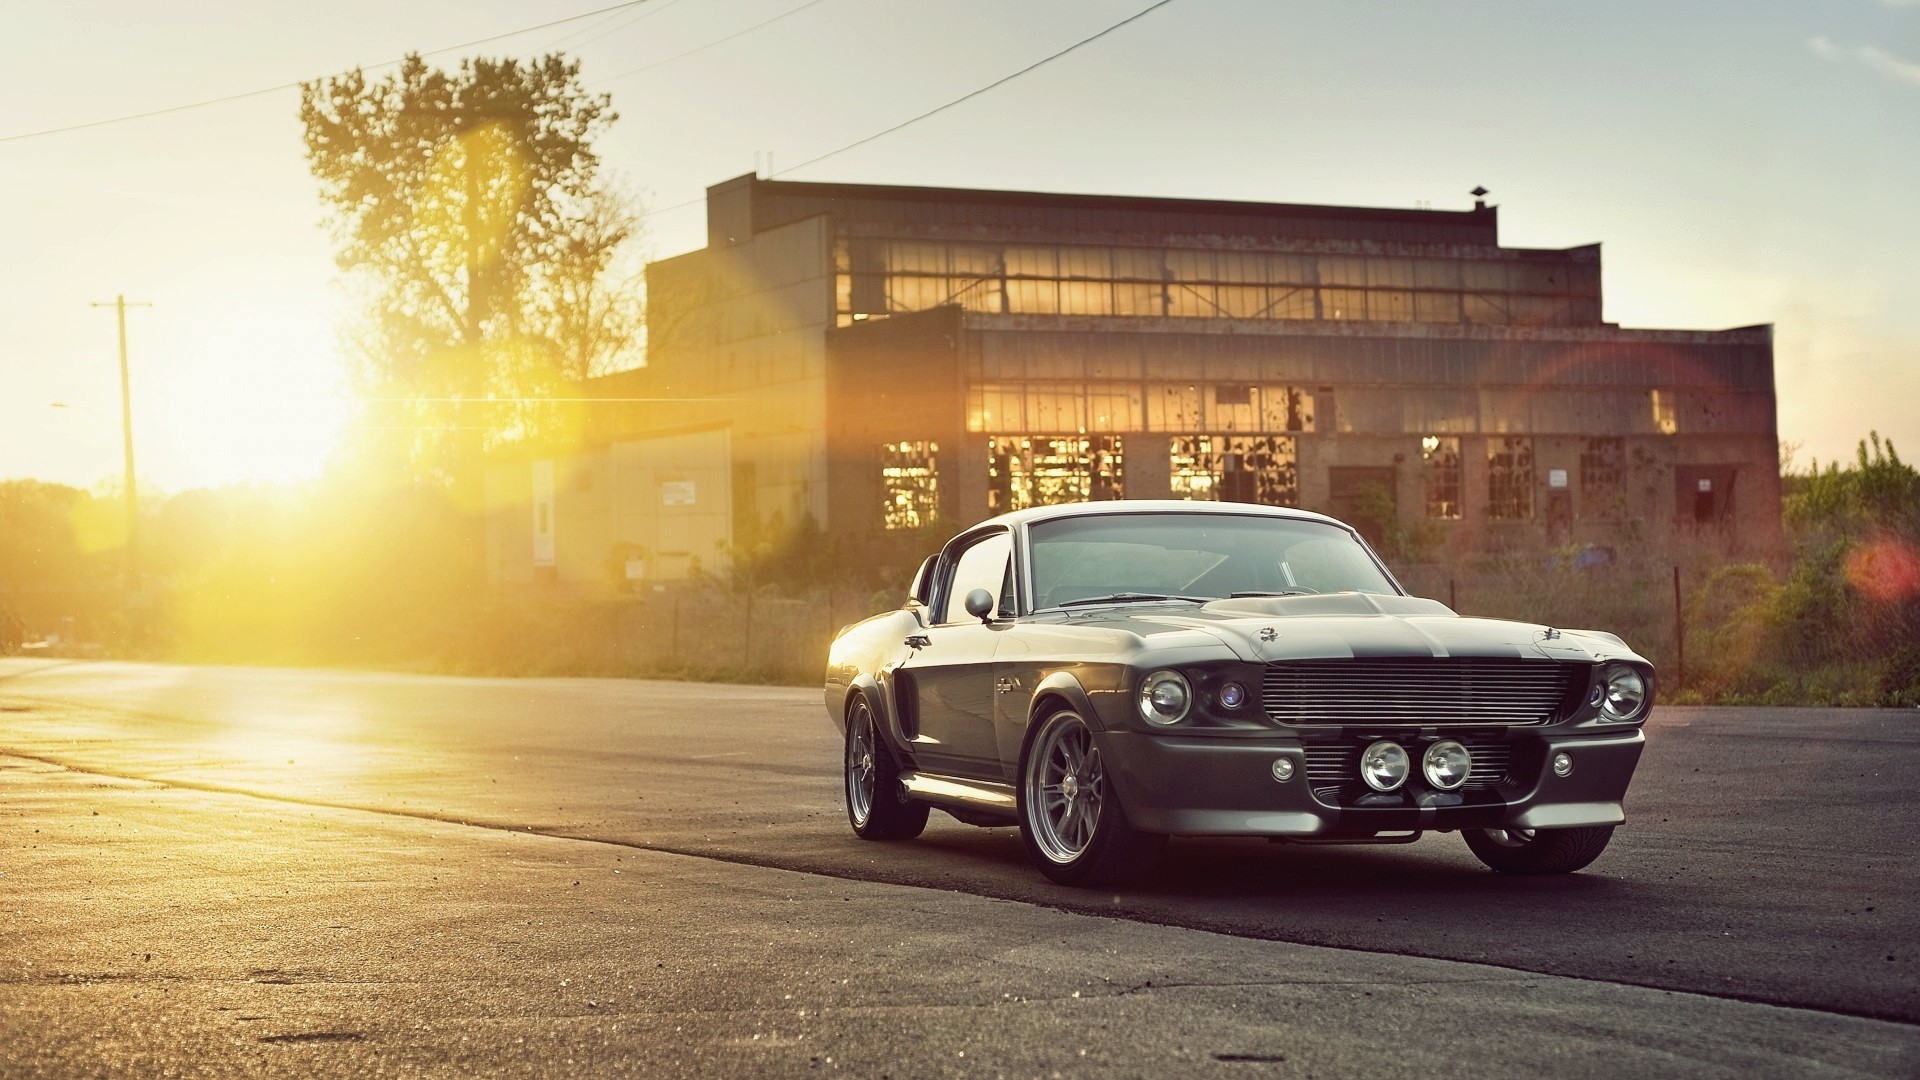 Cars Vehicles Ford Mustang Eleanor Shelby Gt500 Wallpaper